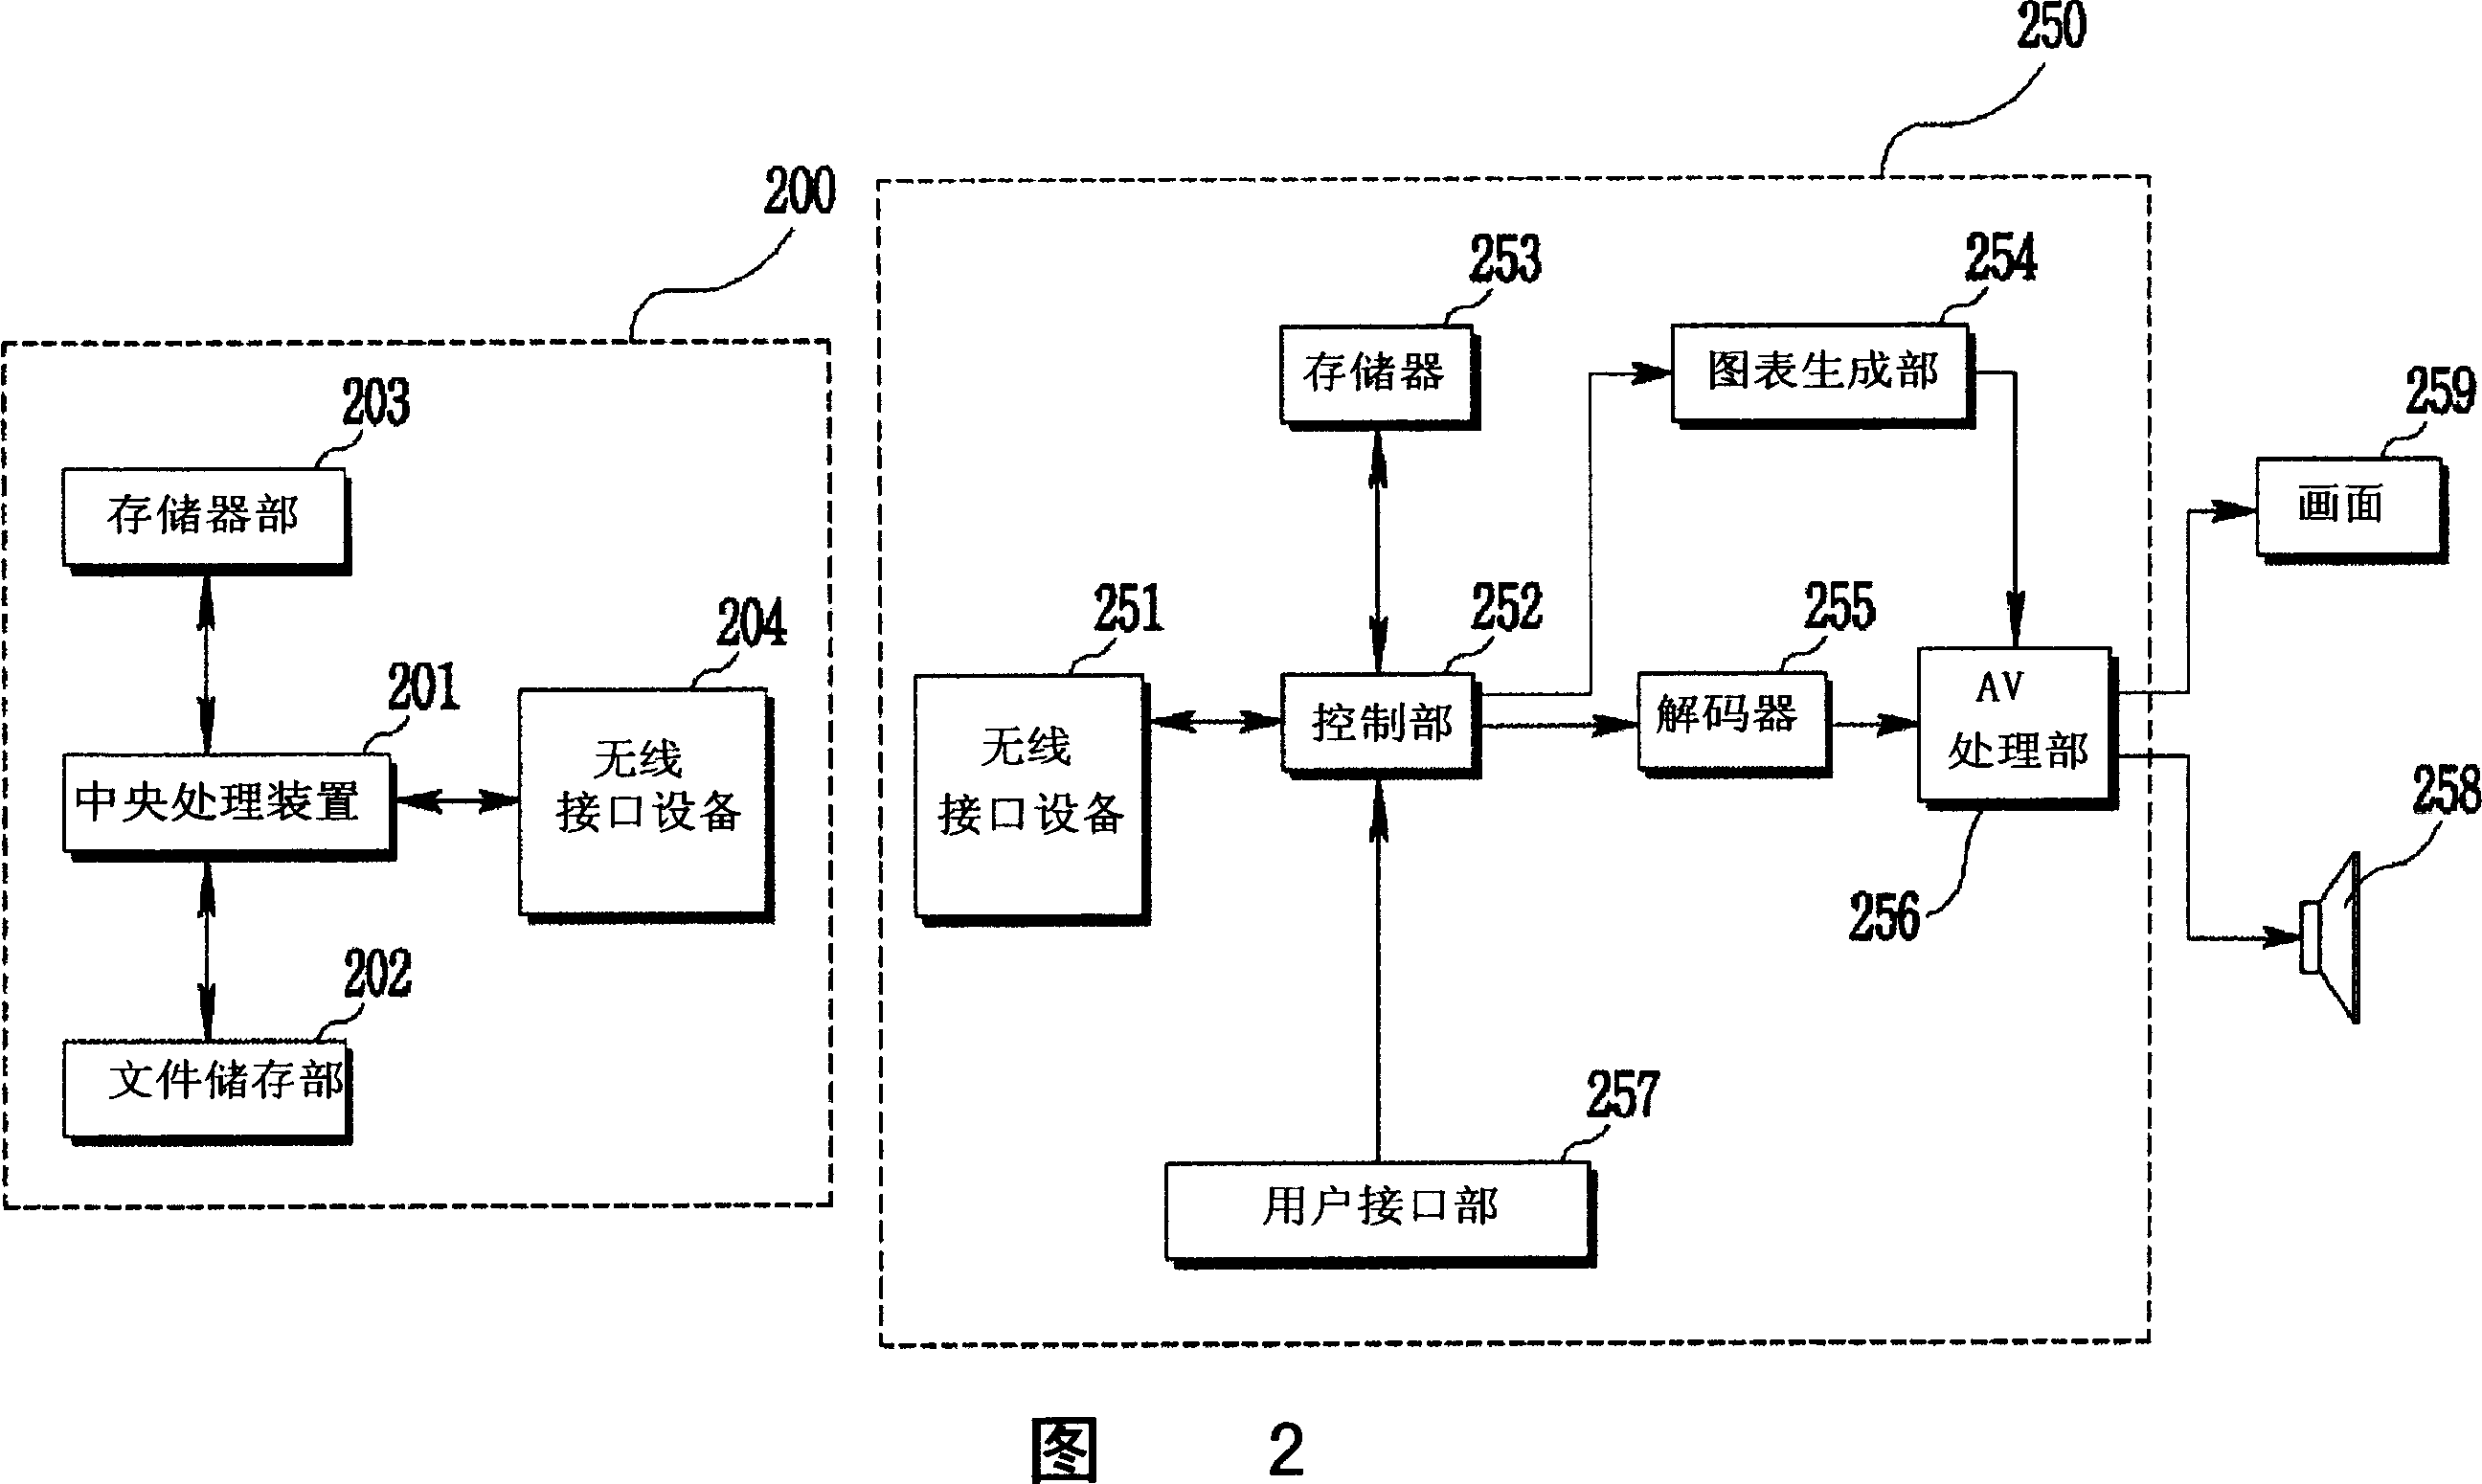 Acoustic and image generating method in radio flow media system